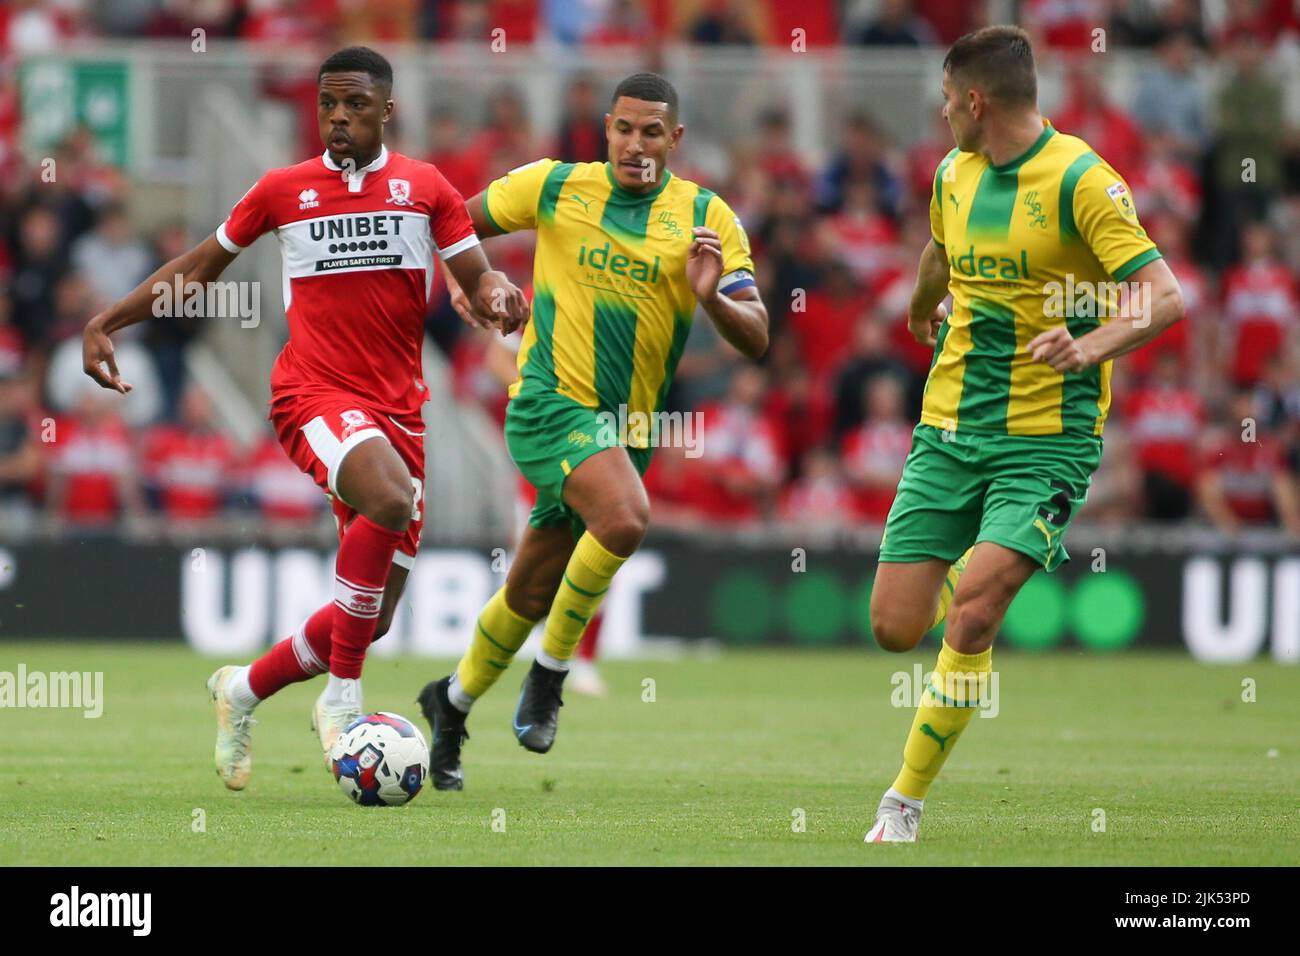 Middlesbrough, UK. 30th July 2022Middlesbrough's Chuba Akpom takes on West Brom defenders during the Sky Bet Championship match between Middlesbrough and West Bromwich Albion at the Riverside Stadium, Middlesbrough on Saturday 30th July 2022. (Credit: Michael Driver | MI News) Credit: MI News & Sport /Alamy Live News Credit: MI News & Sport /Alamy Live News Stock Photo